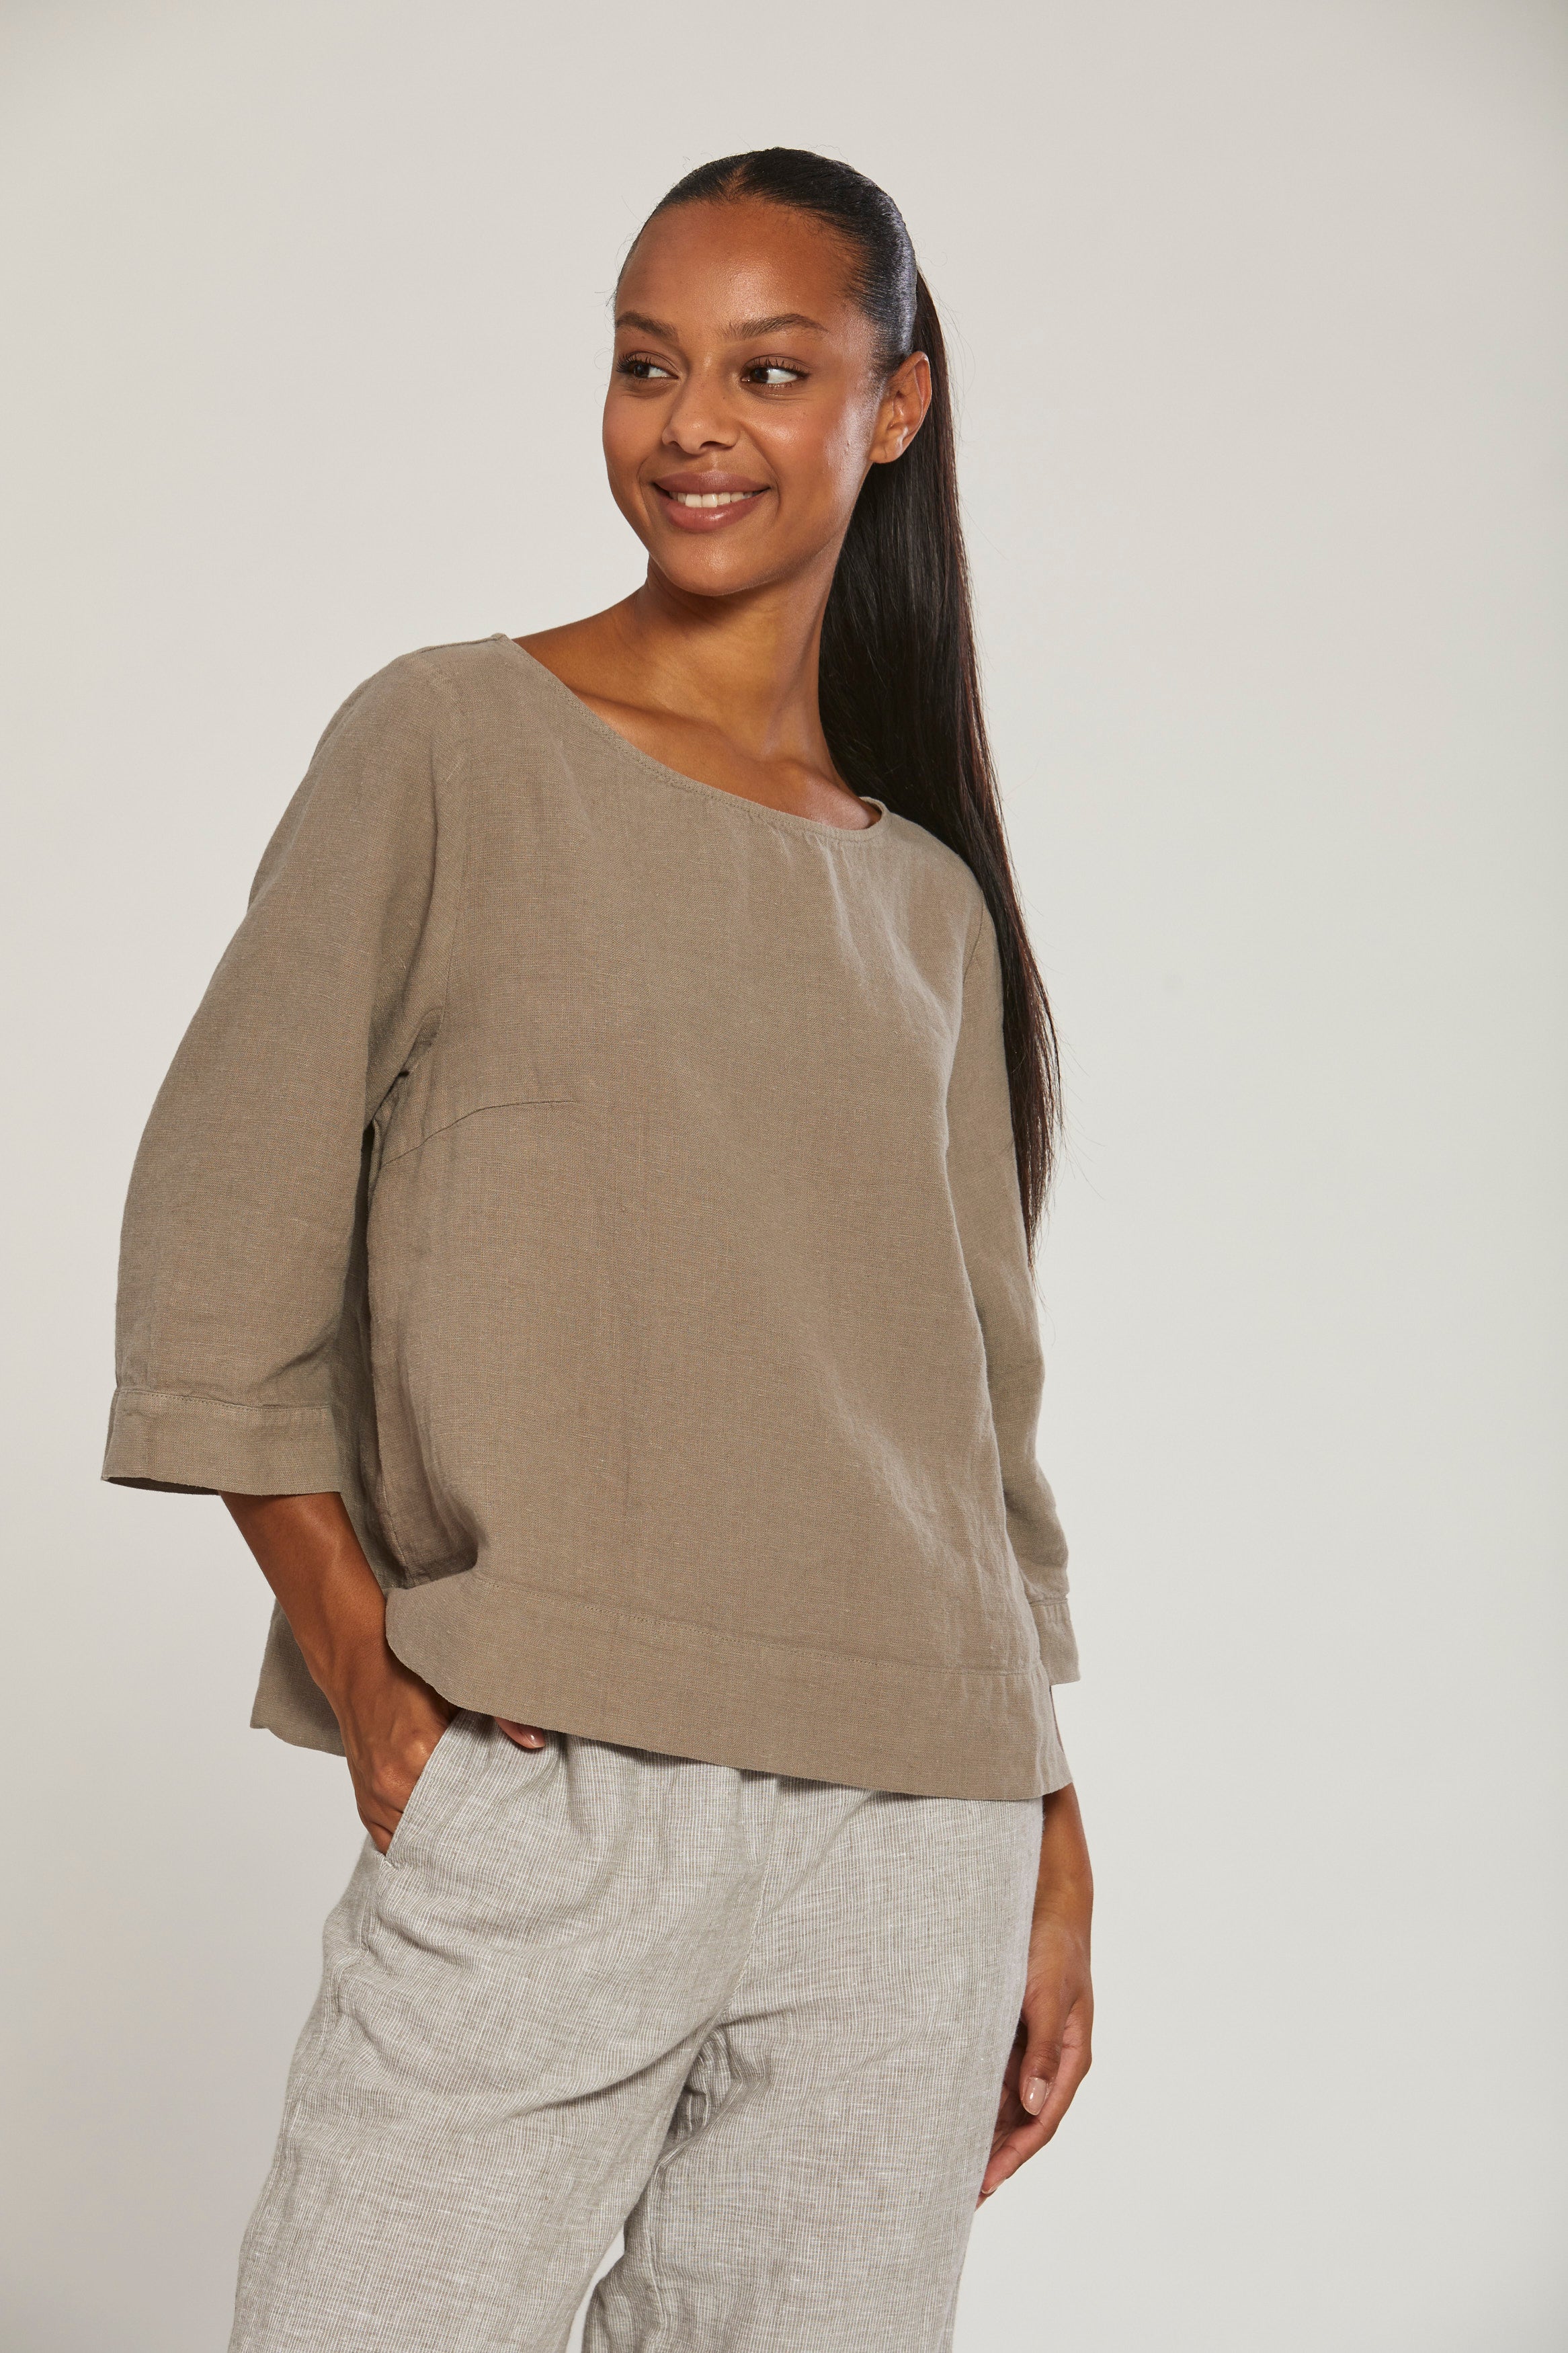 Short Blouse in Taupe